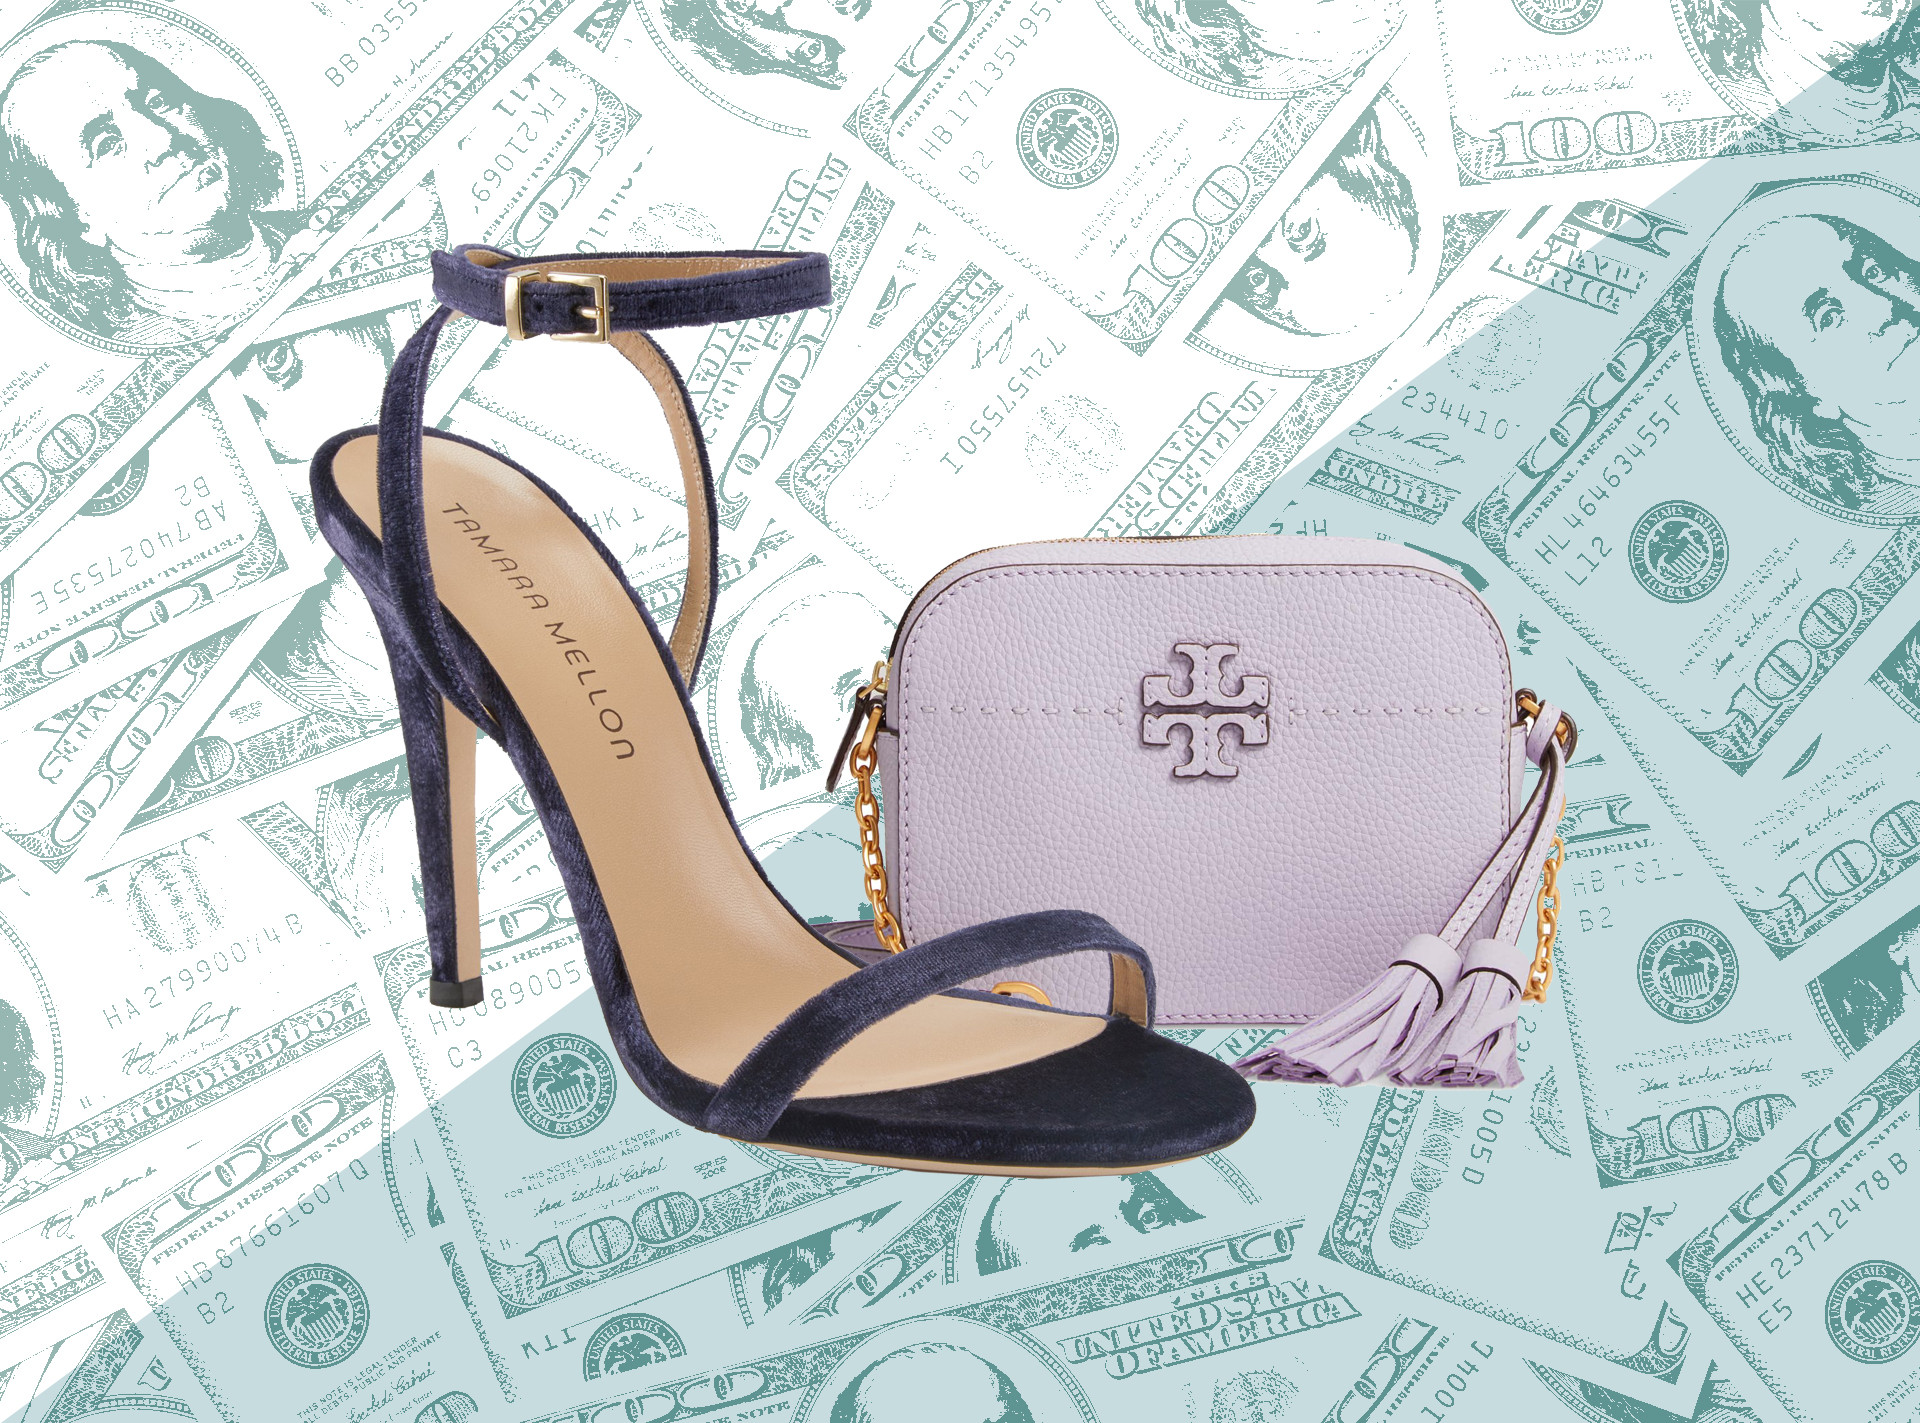 Splurge Your Tax Refund on These Designer Bags & Shoes